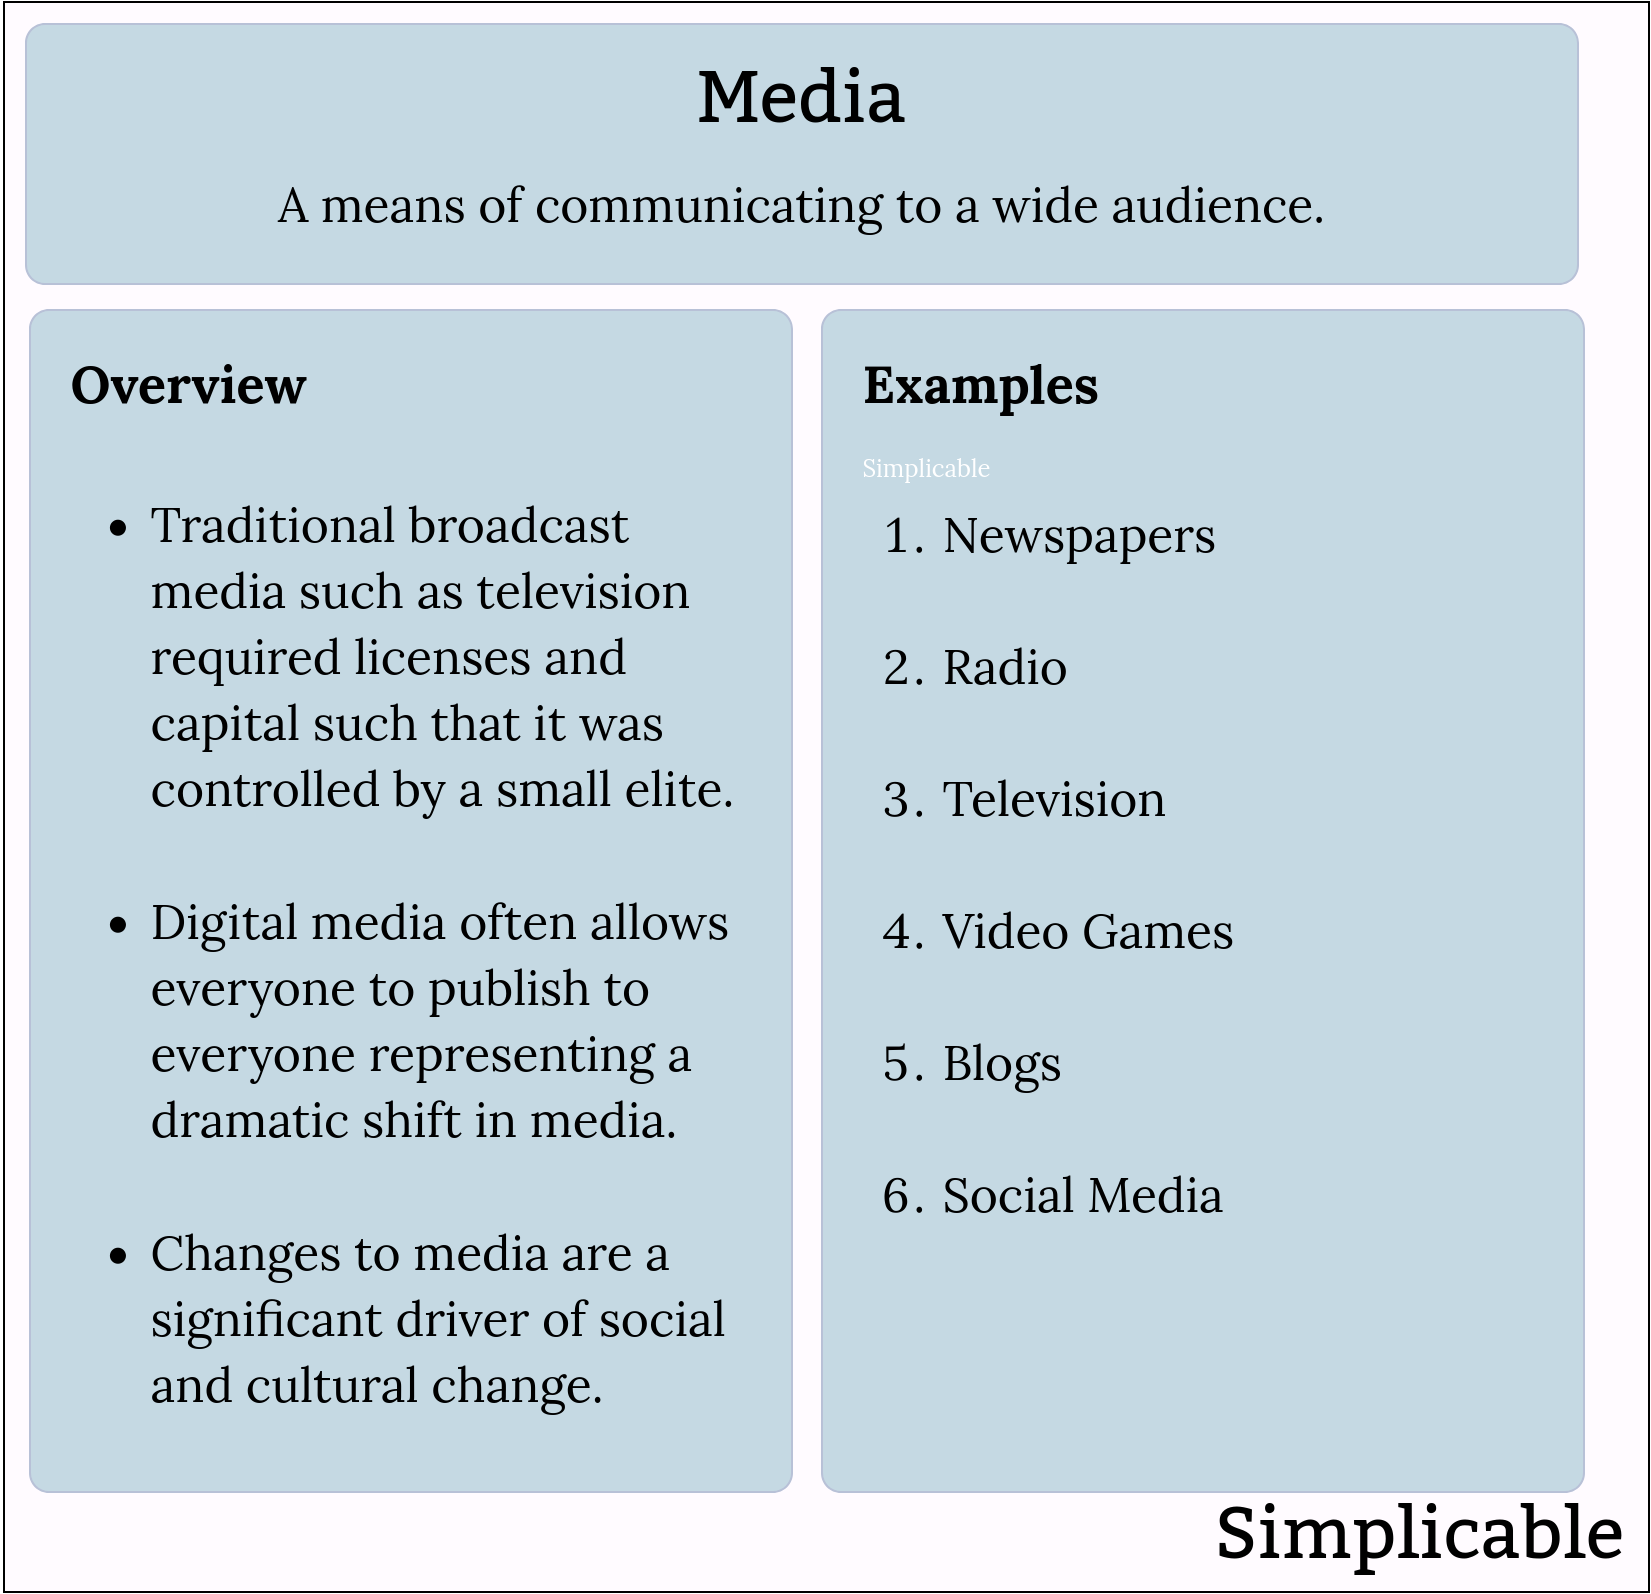 overview of media with examples